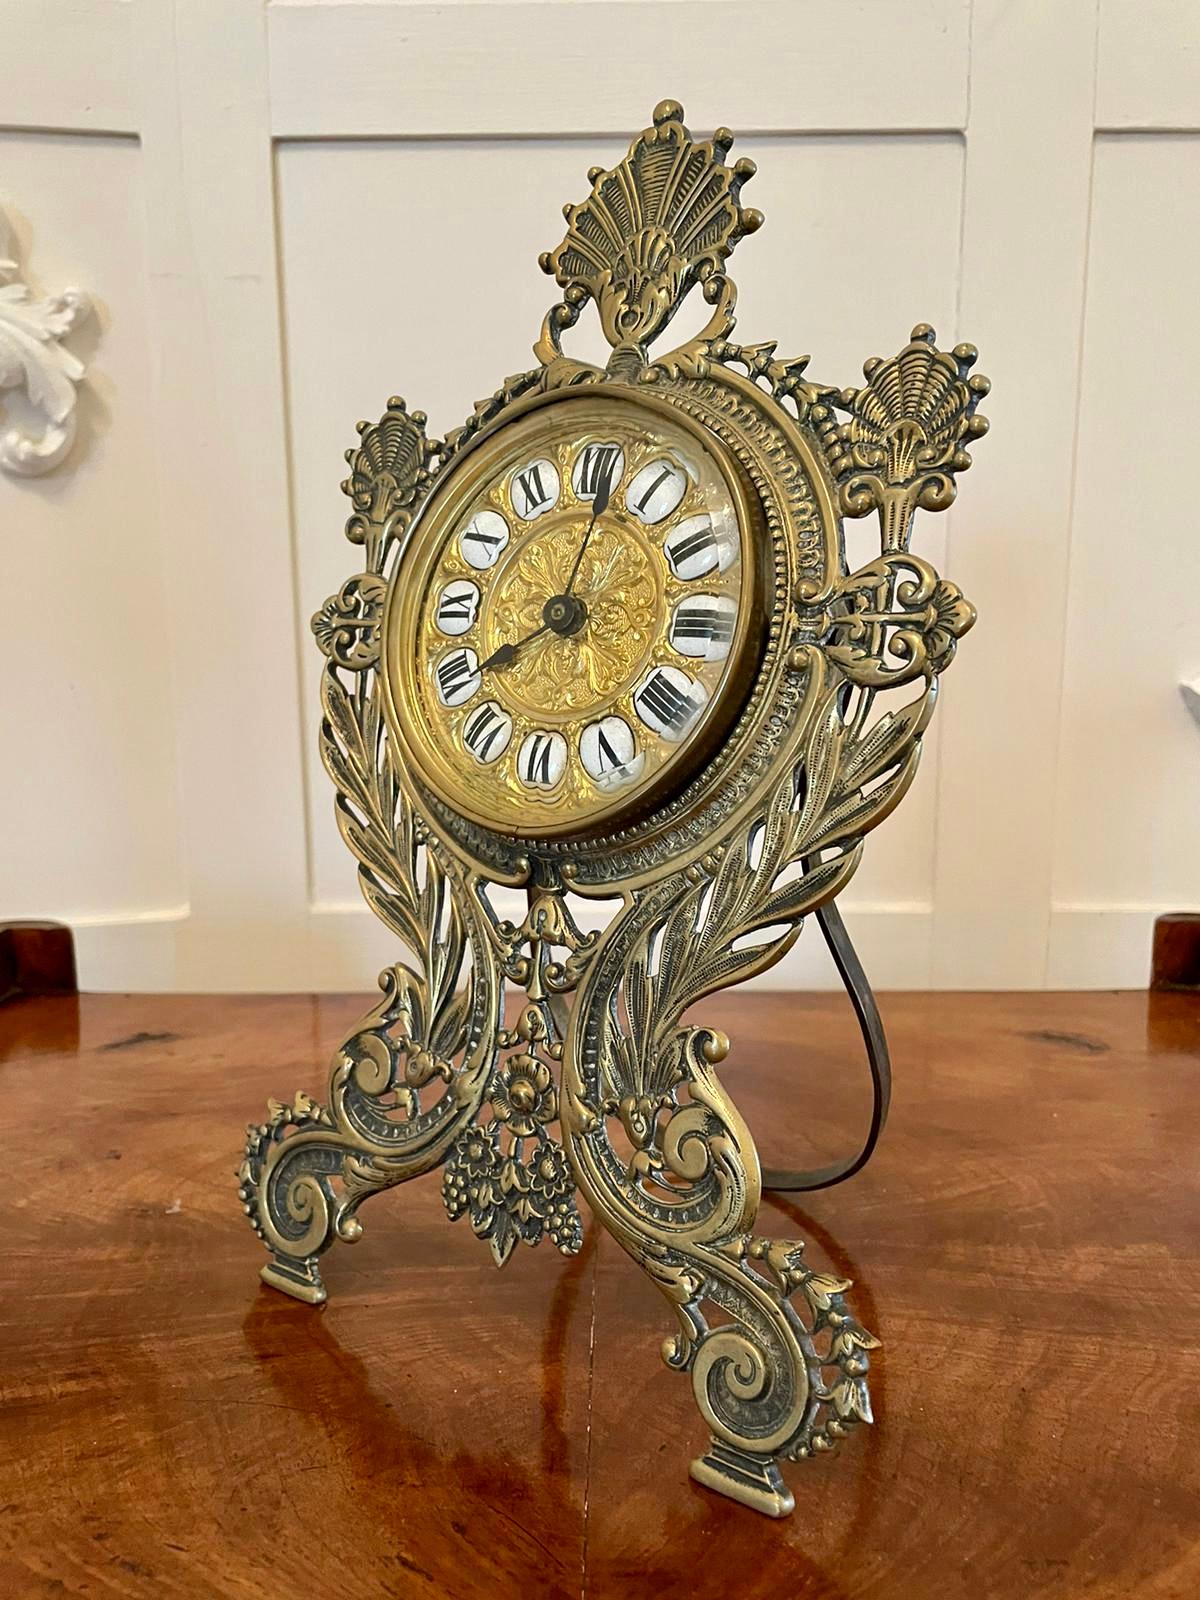 19th century Victorian antique ornate brass desk clock having an exquisite ornate brass and enamel dial with original hands, eight day French movement in a very pretty ornate brass case with scrolls, leaves and flowers. Original swing out support in